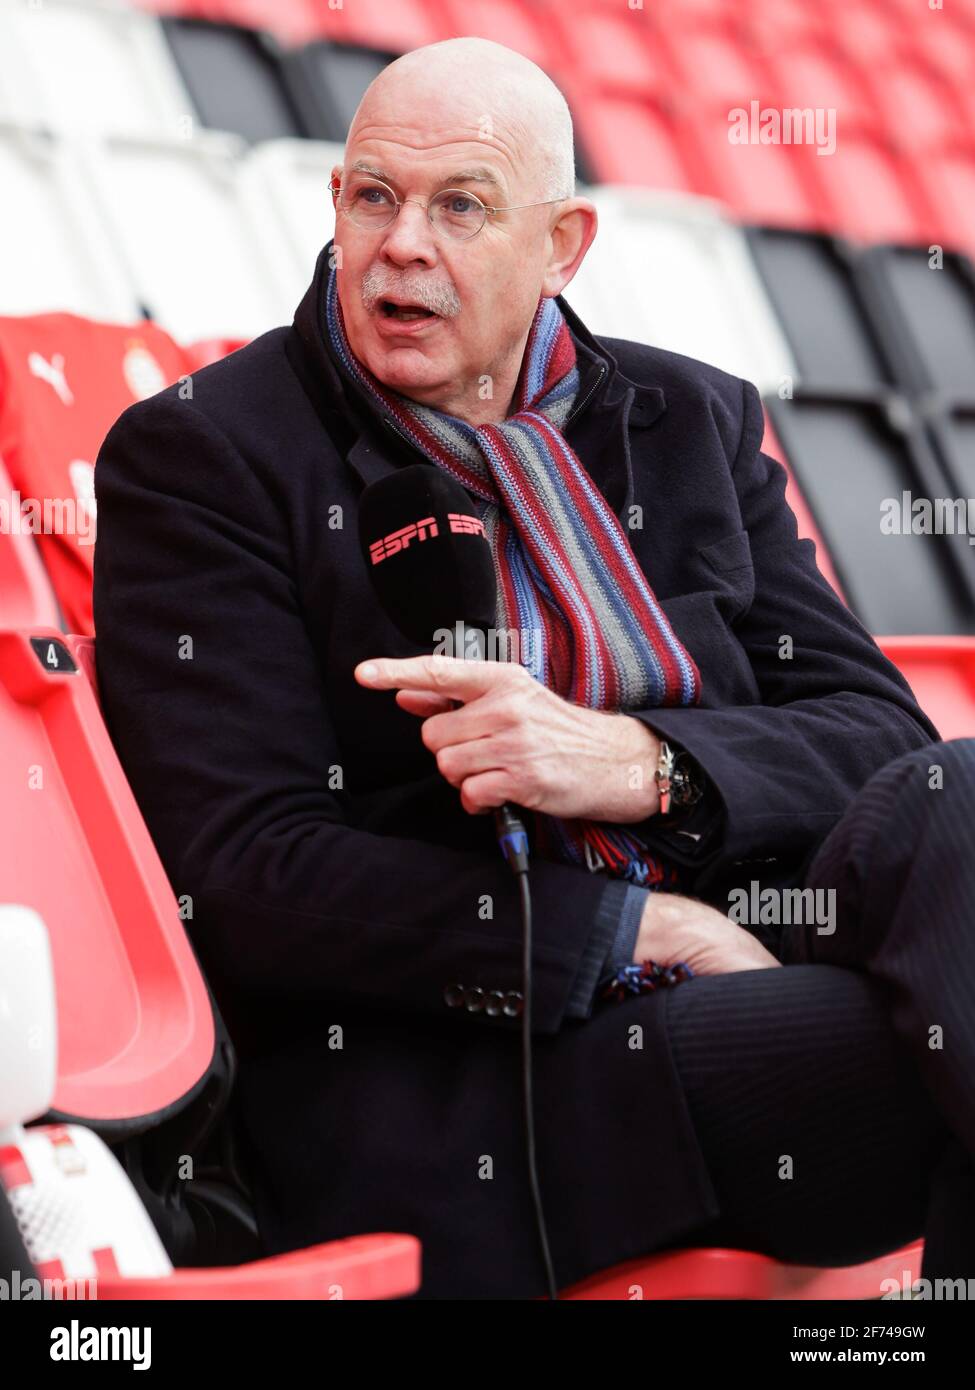 EINDHOVEN, NETHERLANDS - APRIL 4: Director of PSV Toon Gerbrands during the  Dutch Eredivisie match between PSV and Heracles Almelo at Philips Stadion  Stock Photo - Alamy